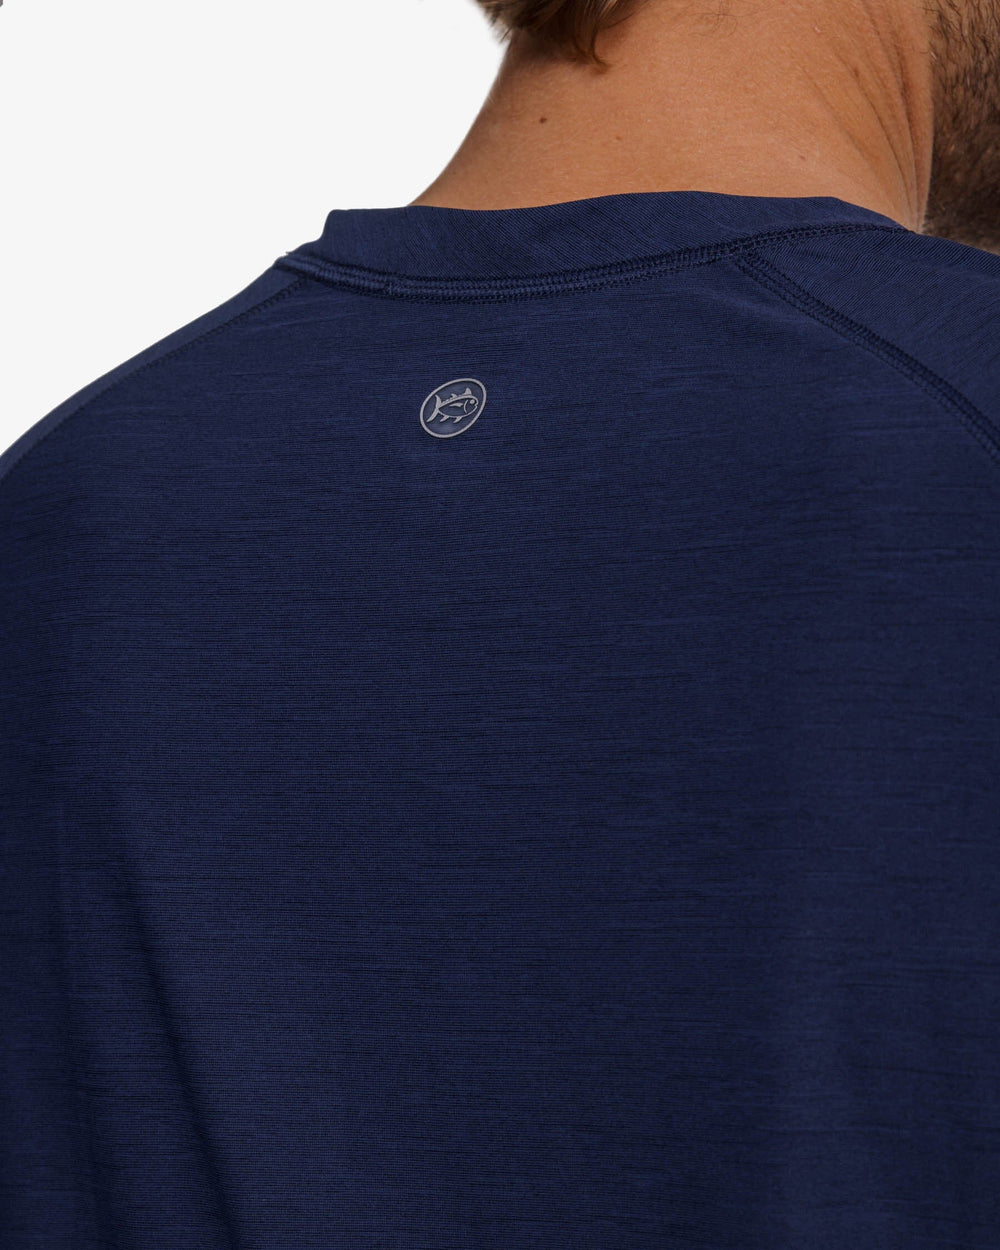 The yoke view of the Southern Tide brrr°®-illiant Performance Tee by Southern Tide - Nautical Navy